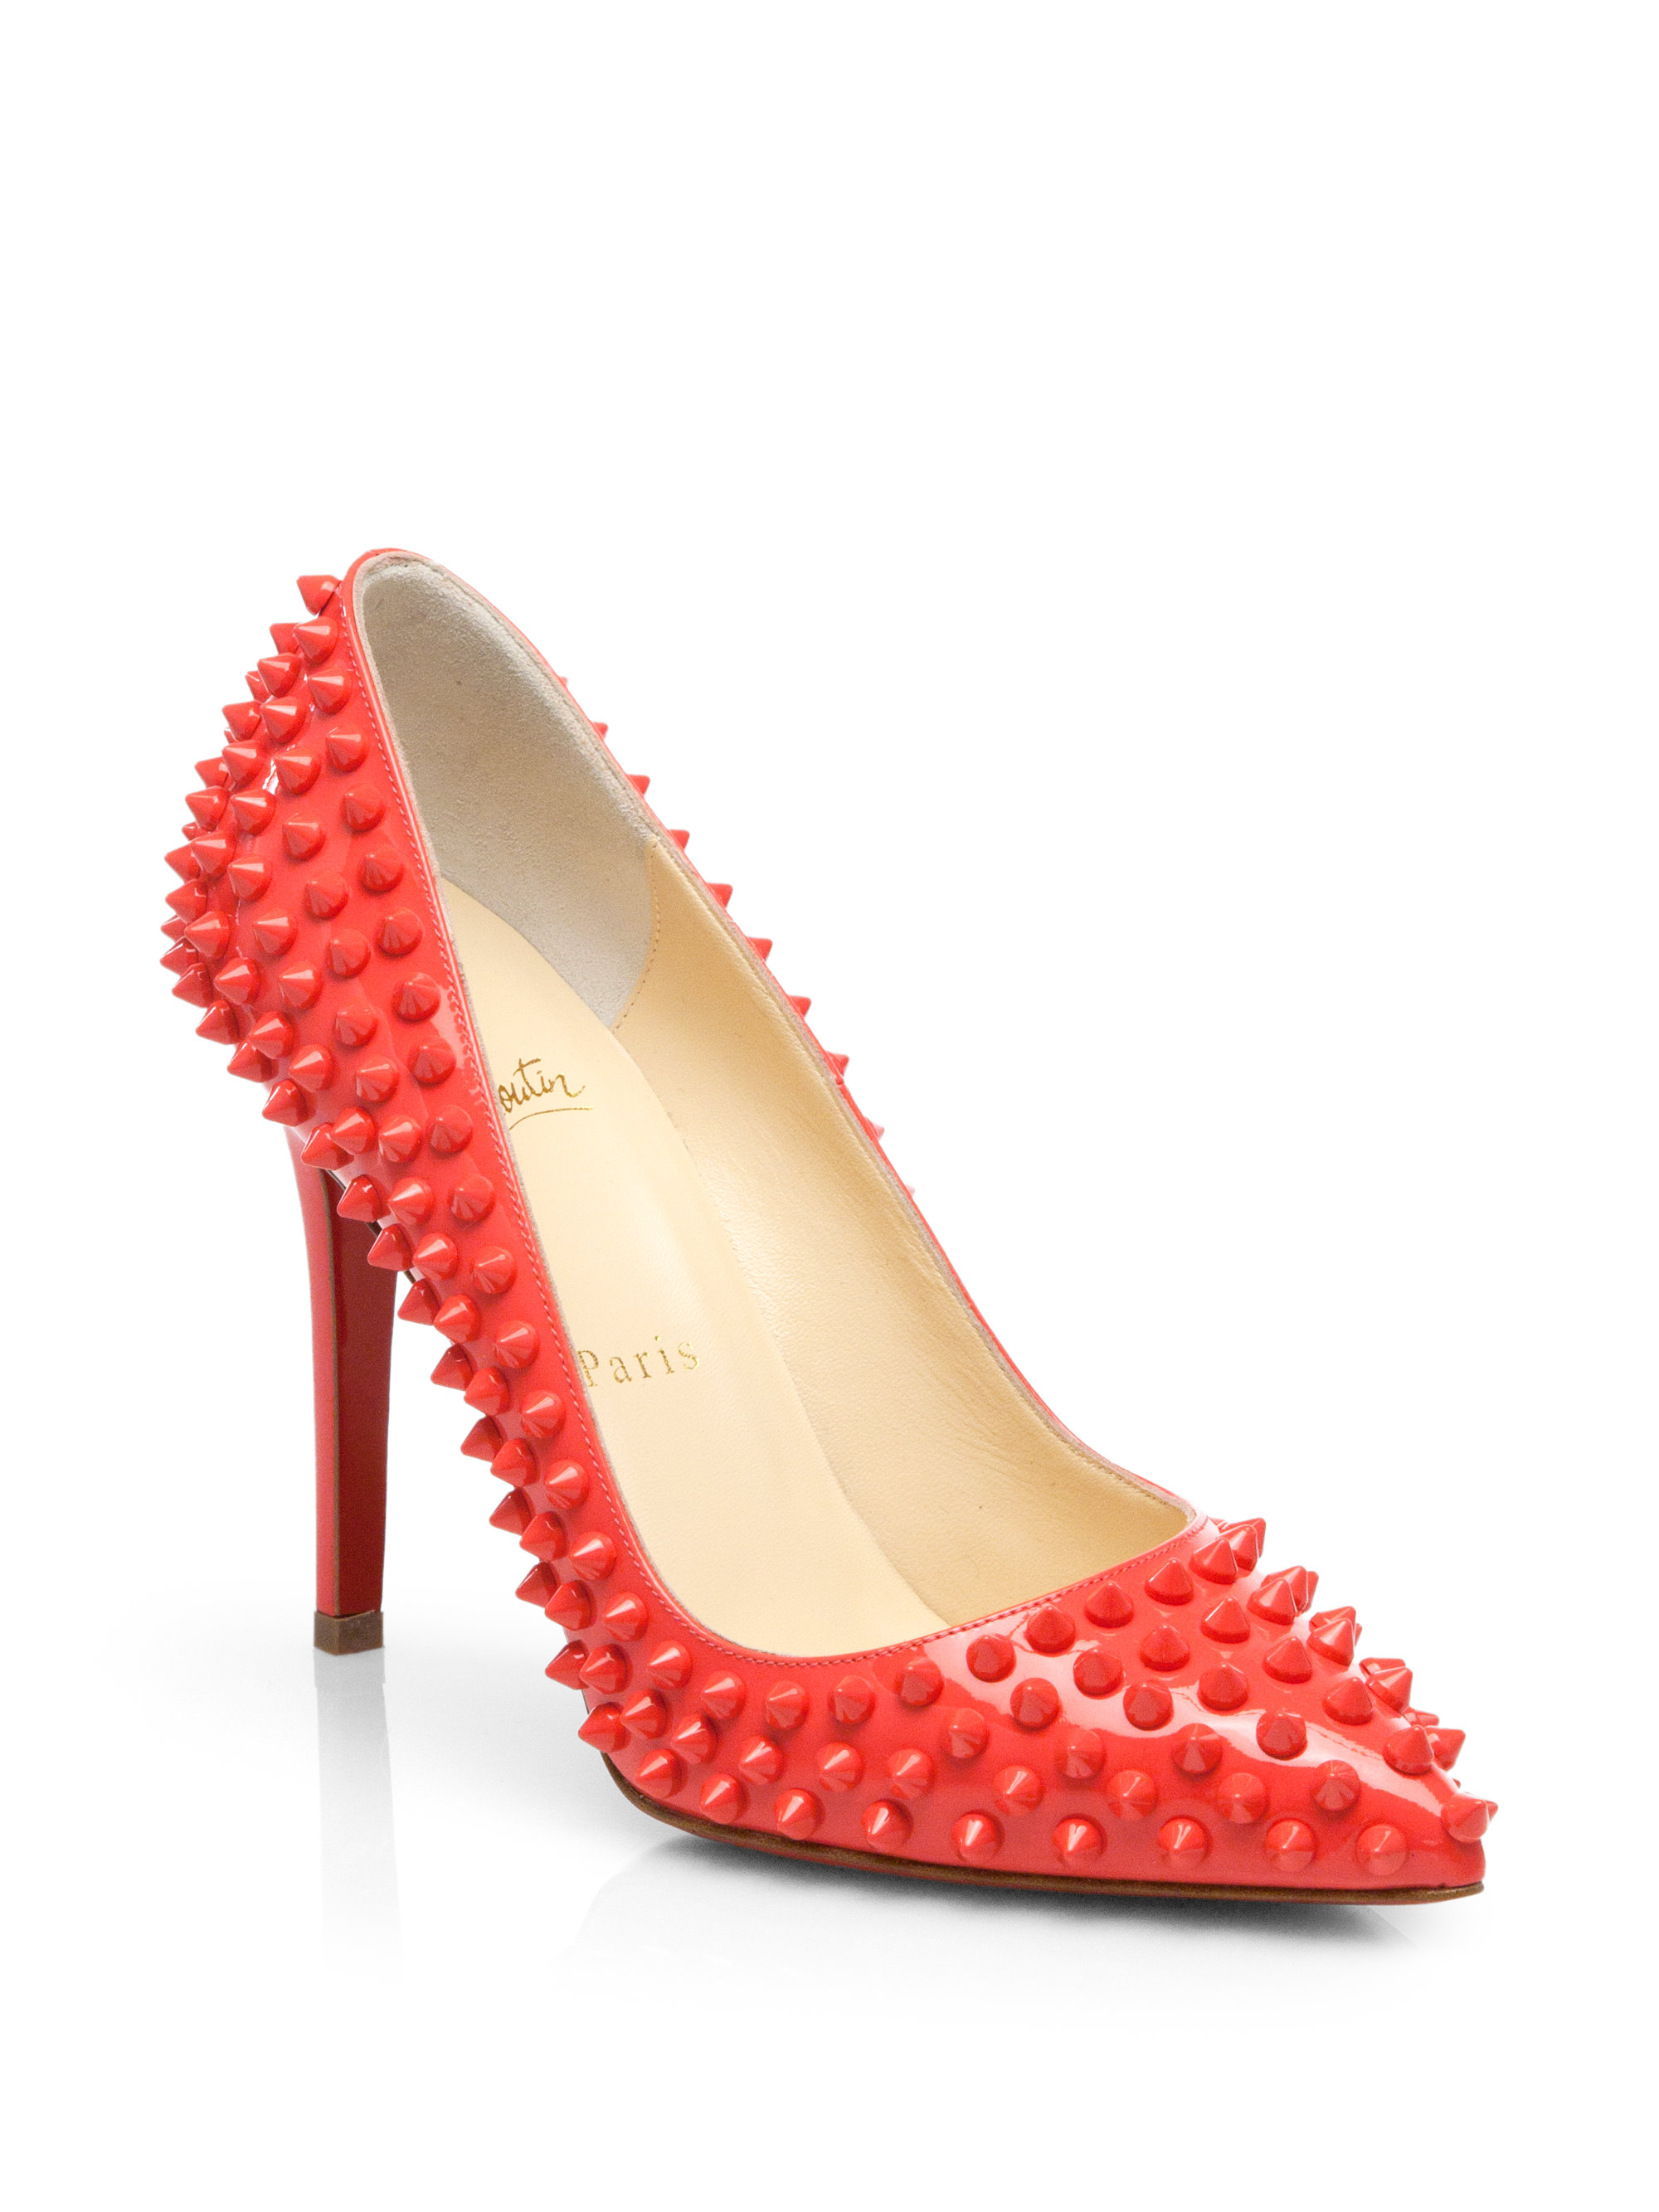 Lyst - Christian Louboutin Pigalle 100 Spiked Patent Leather Pumps in Red